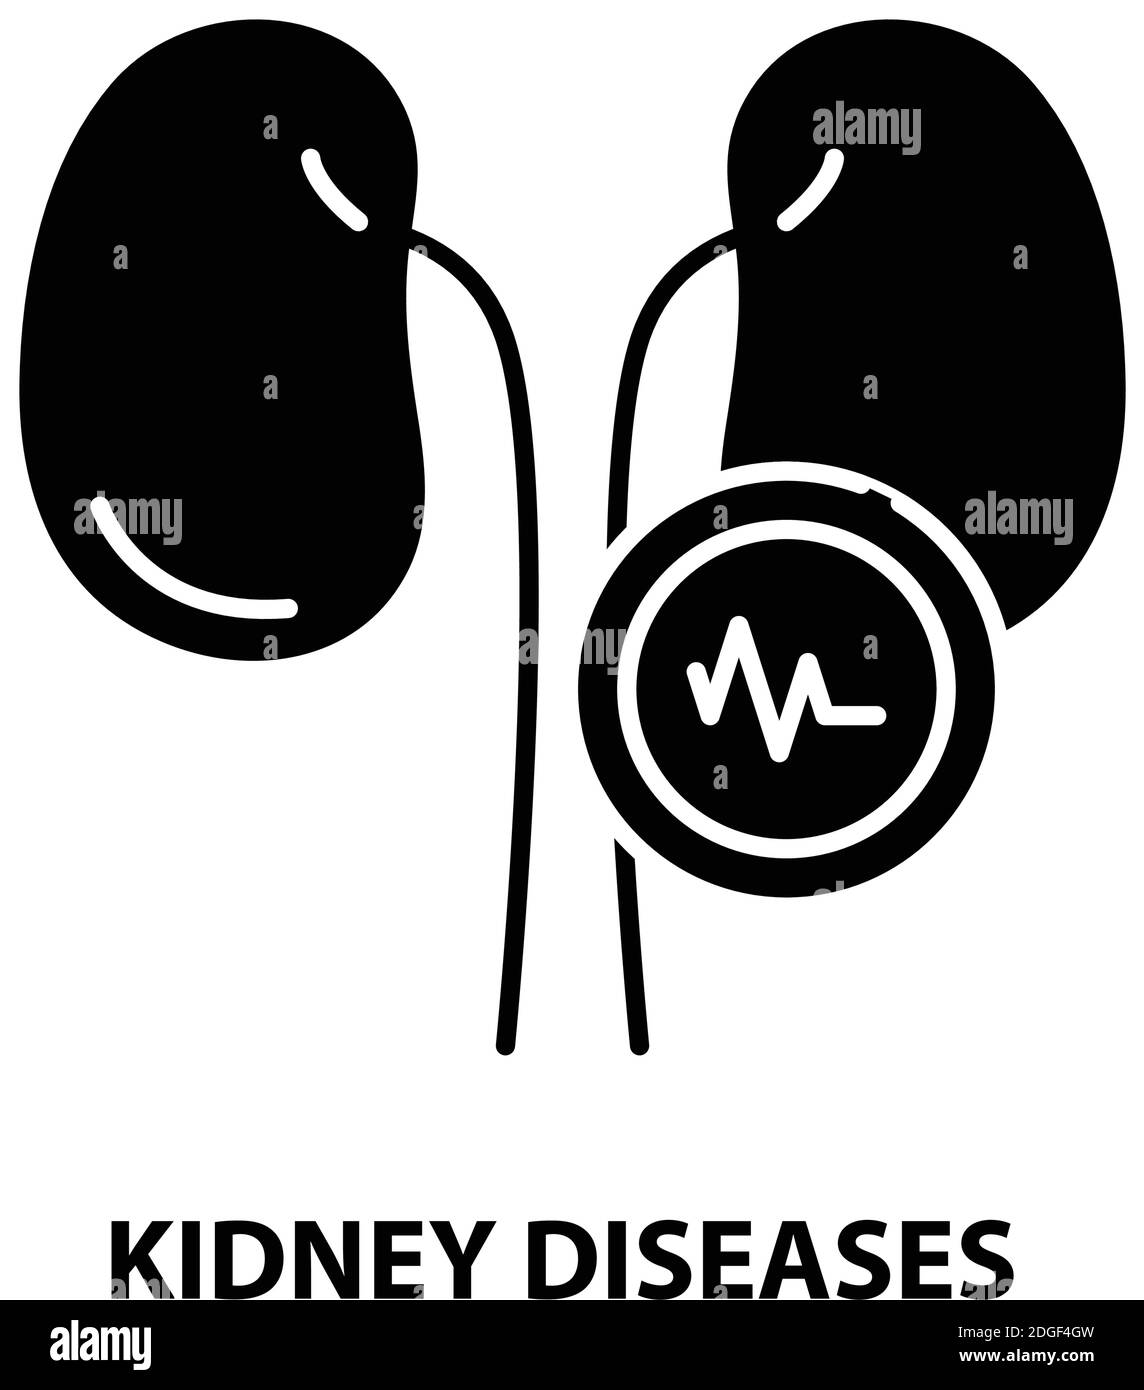 kidney diseases icon, black vector sign with editable strokes, concept illustration Stock Vector